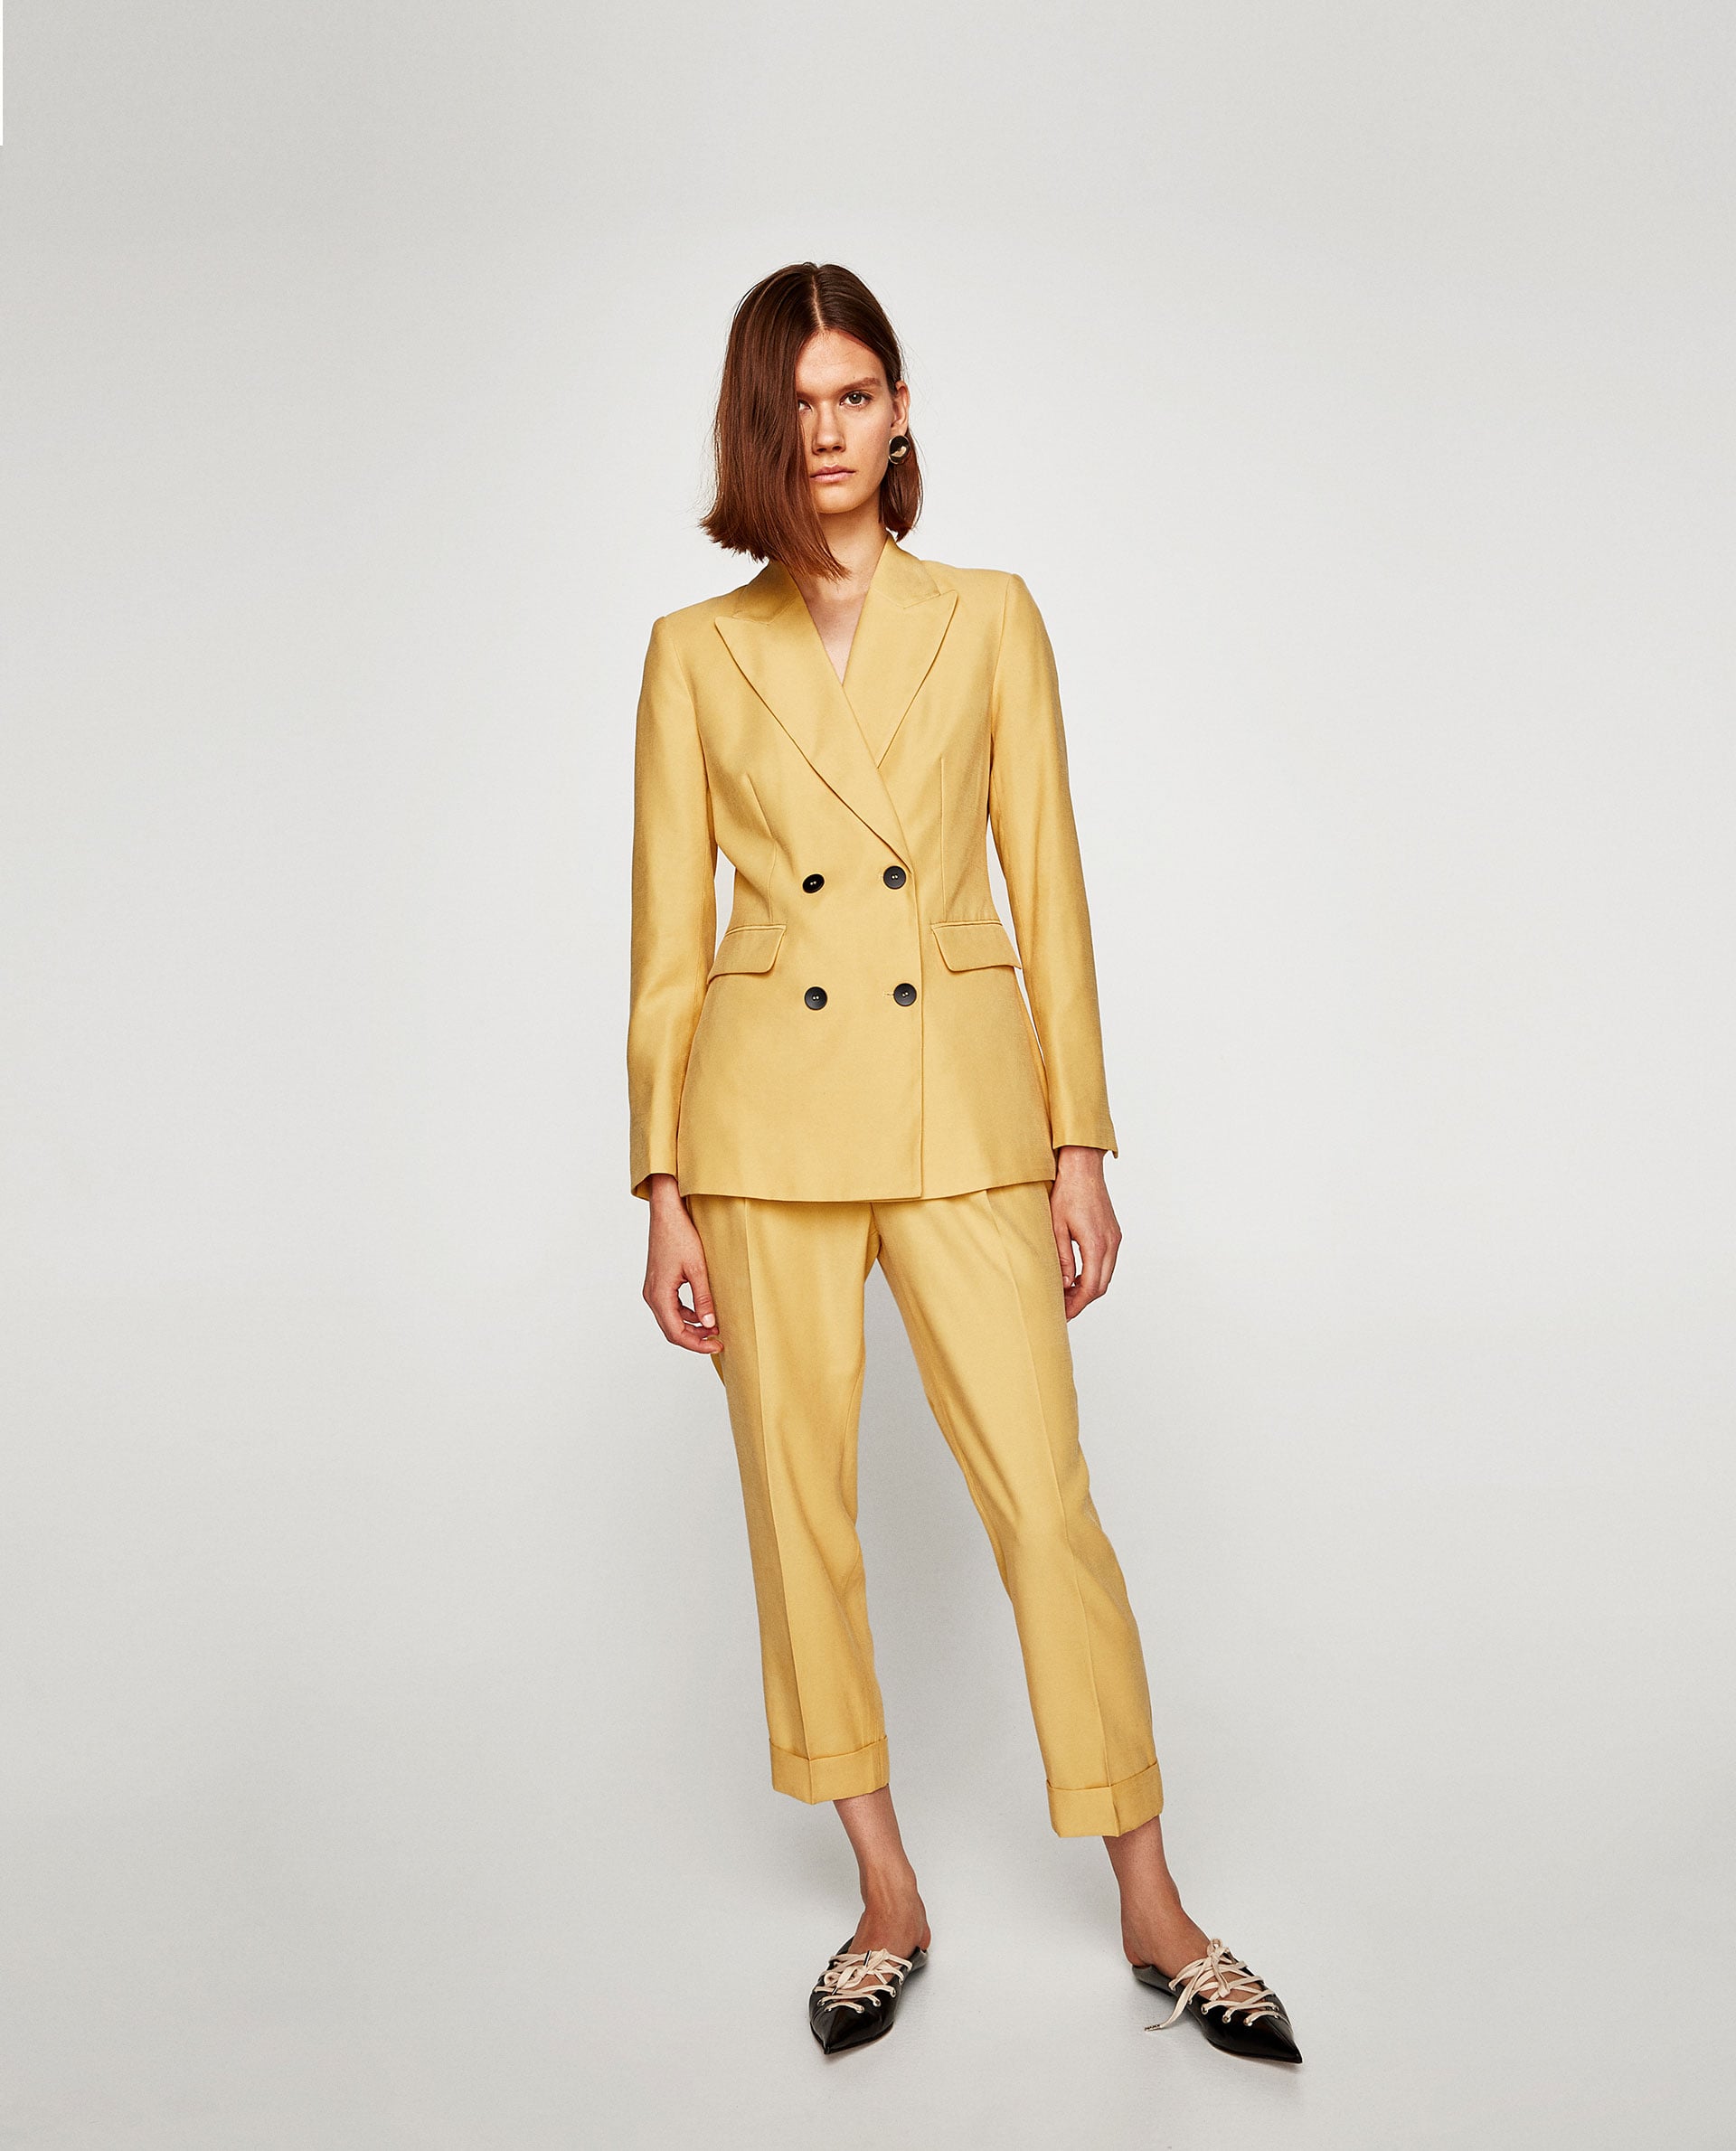 yellow pantsuit outfit